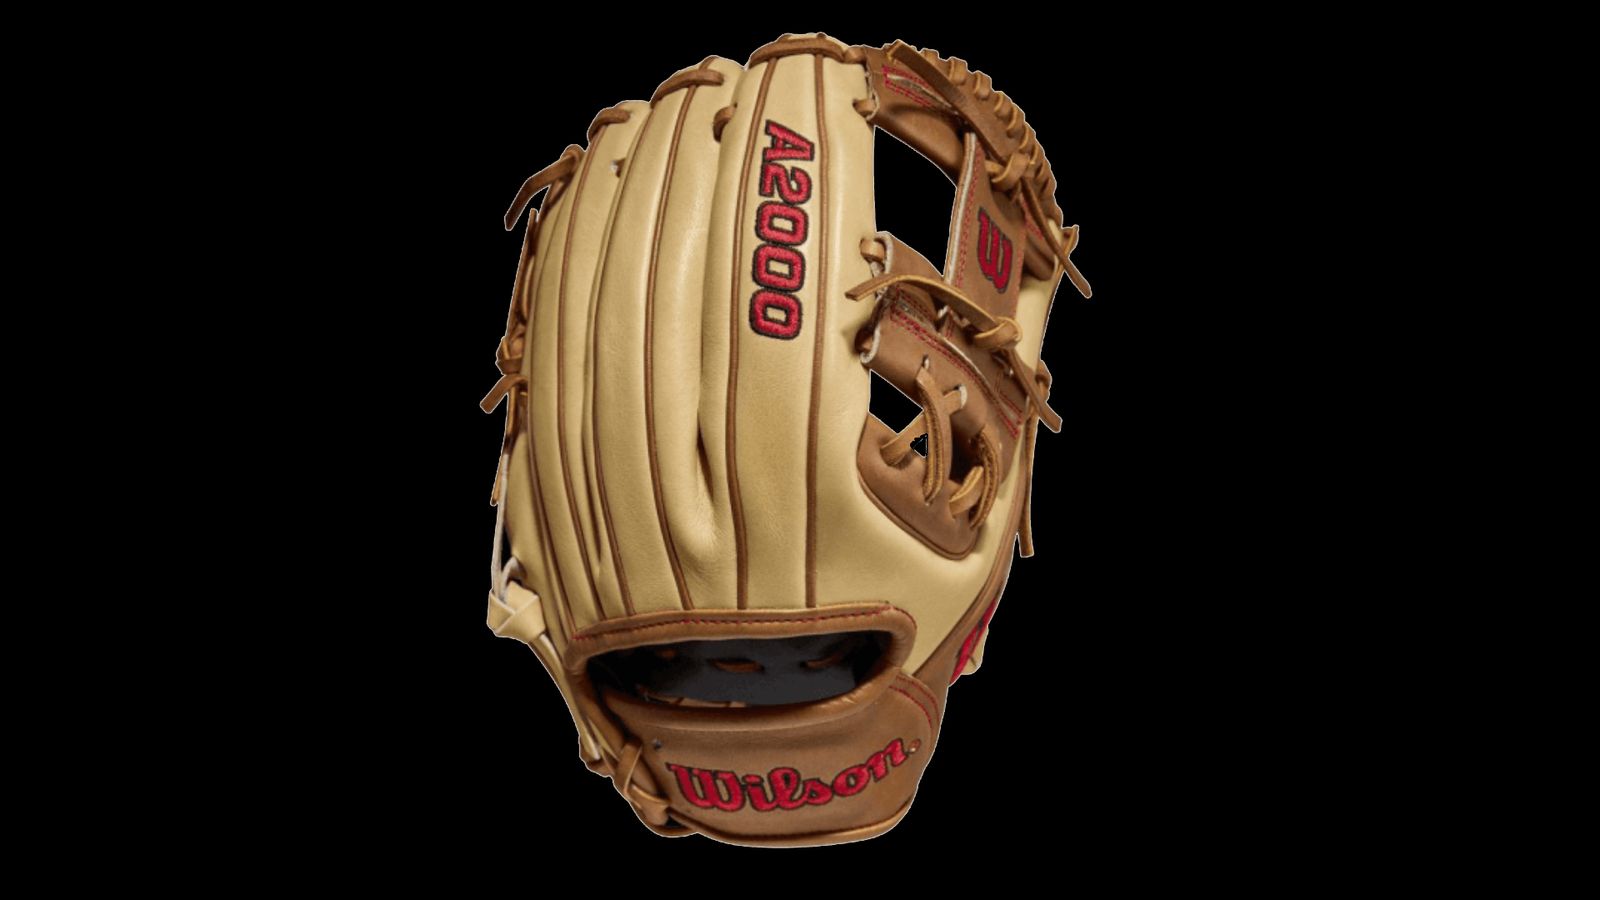 Wilson A2000 product image of a tan leather glove with red branding.